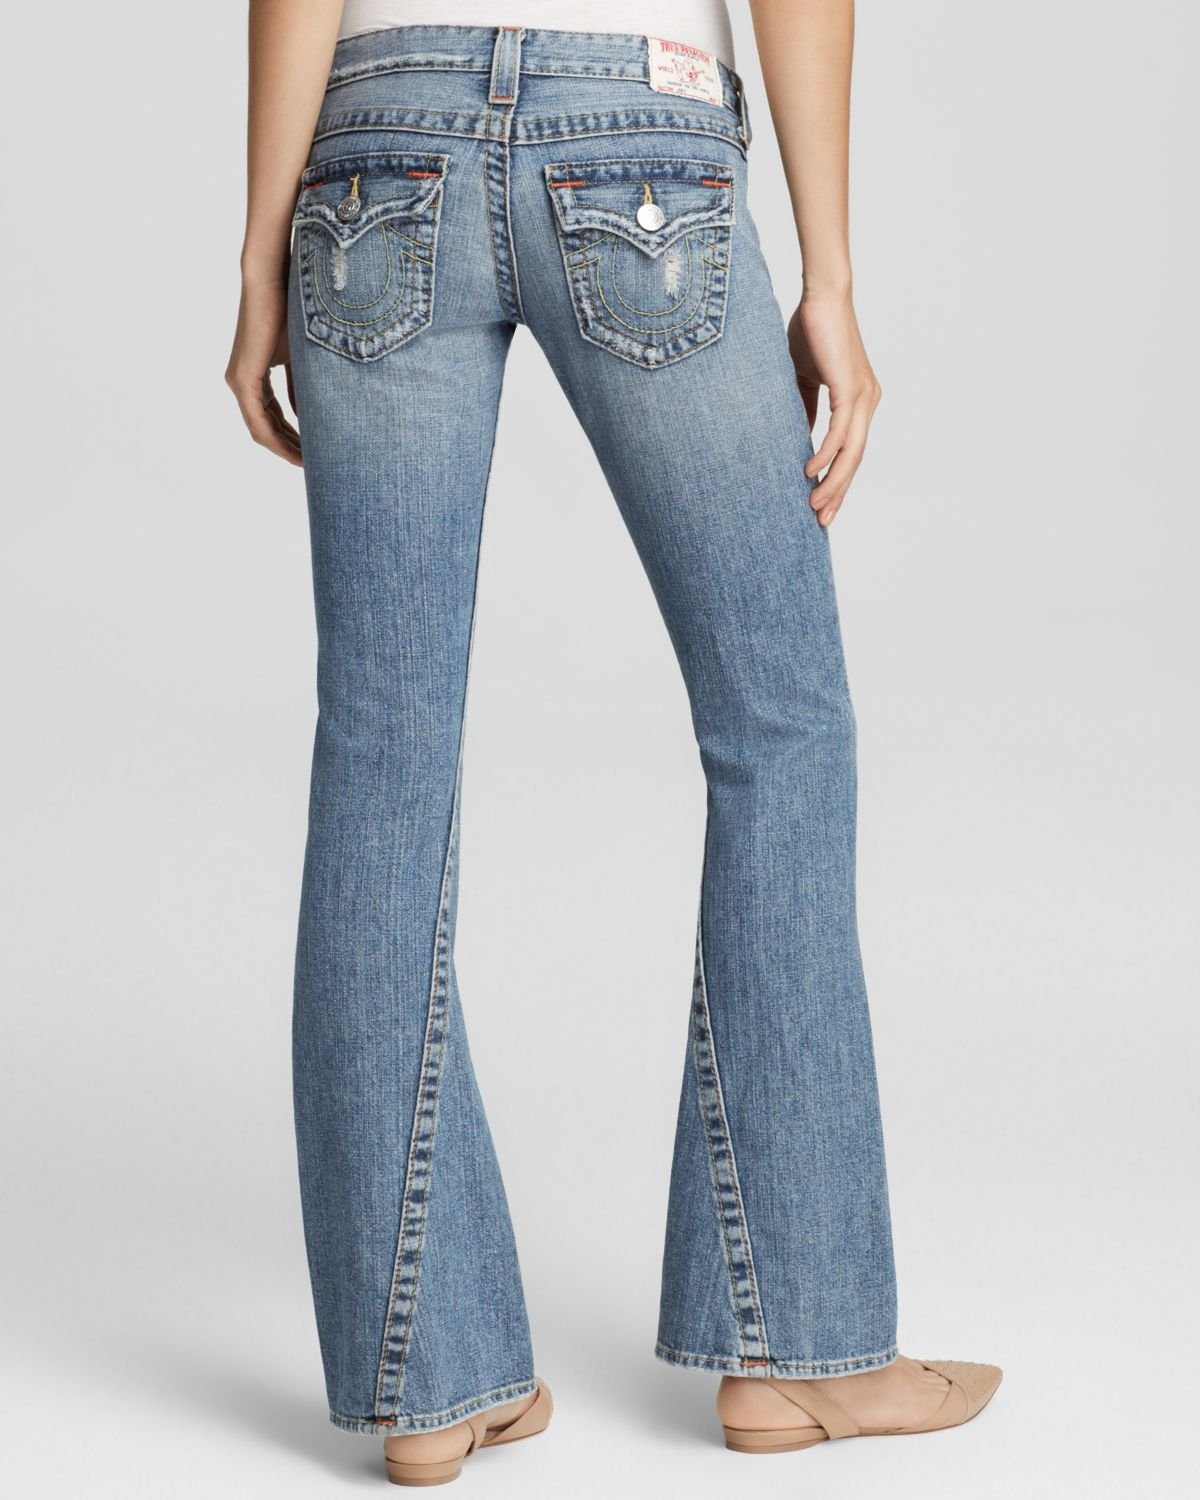 Lyst - True Religion Joey Original Low Rise Flare Jeans In Destroyed in ...